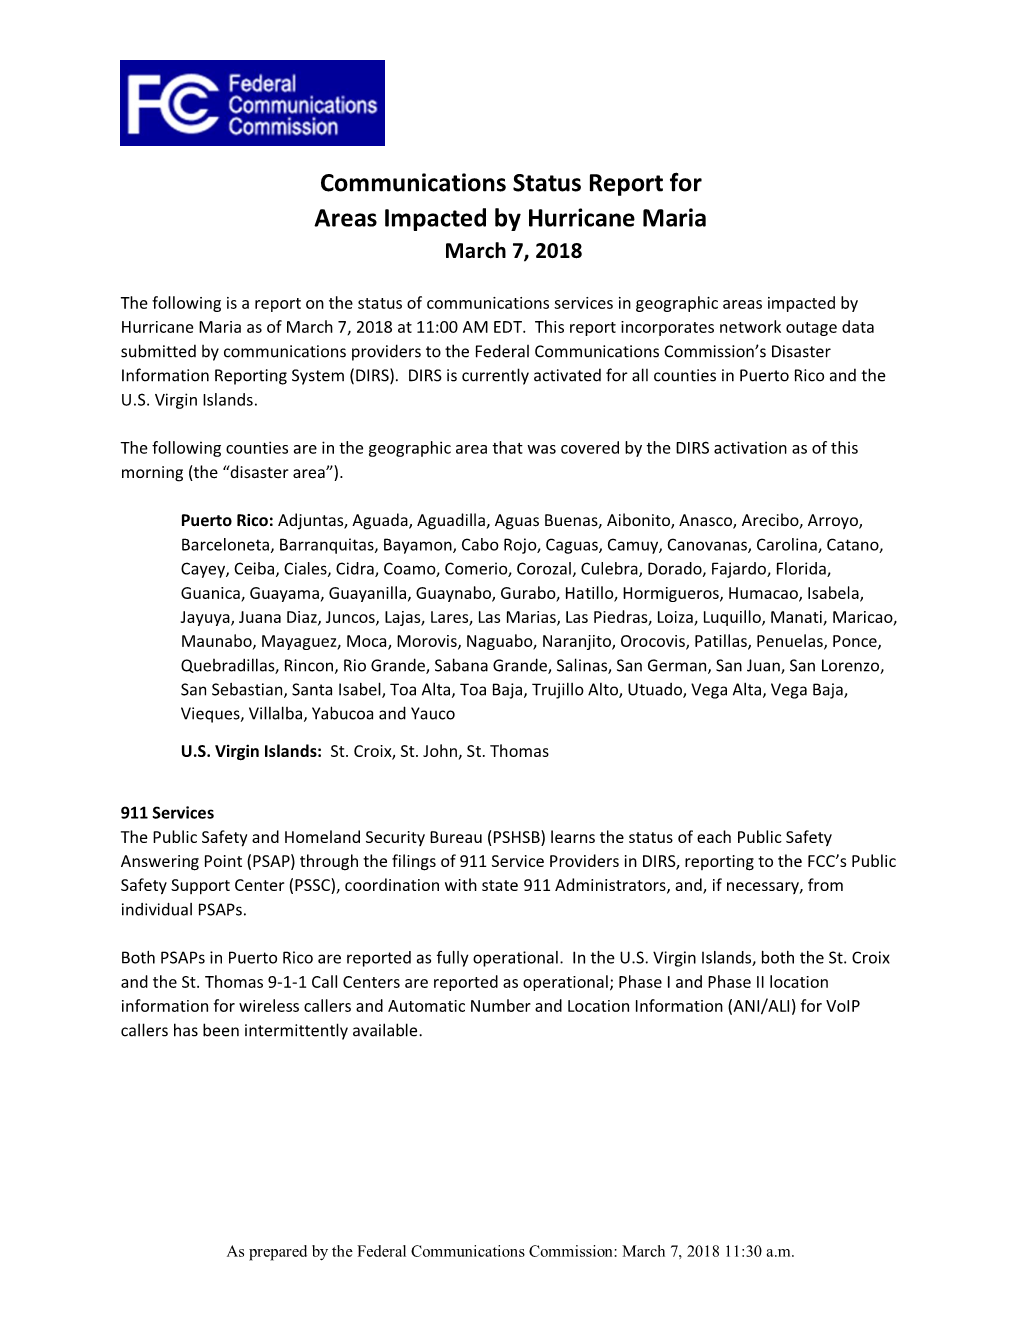 Communications Status Report for Areas Impacted by Hurricane Maria March 7, 2018